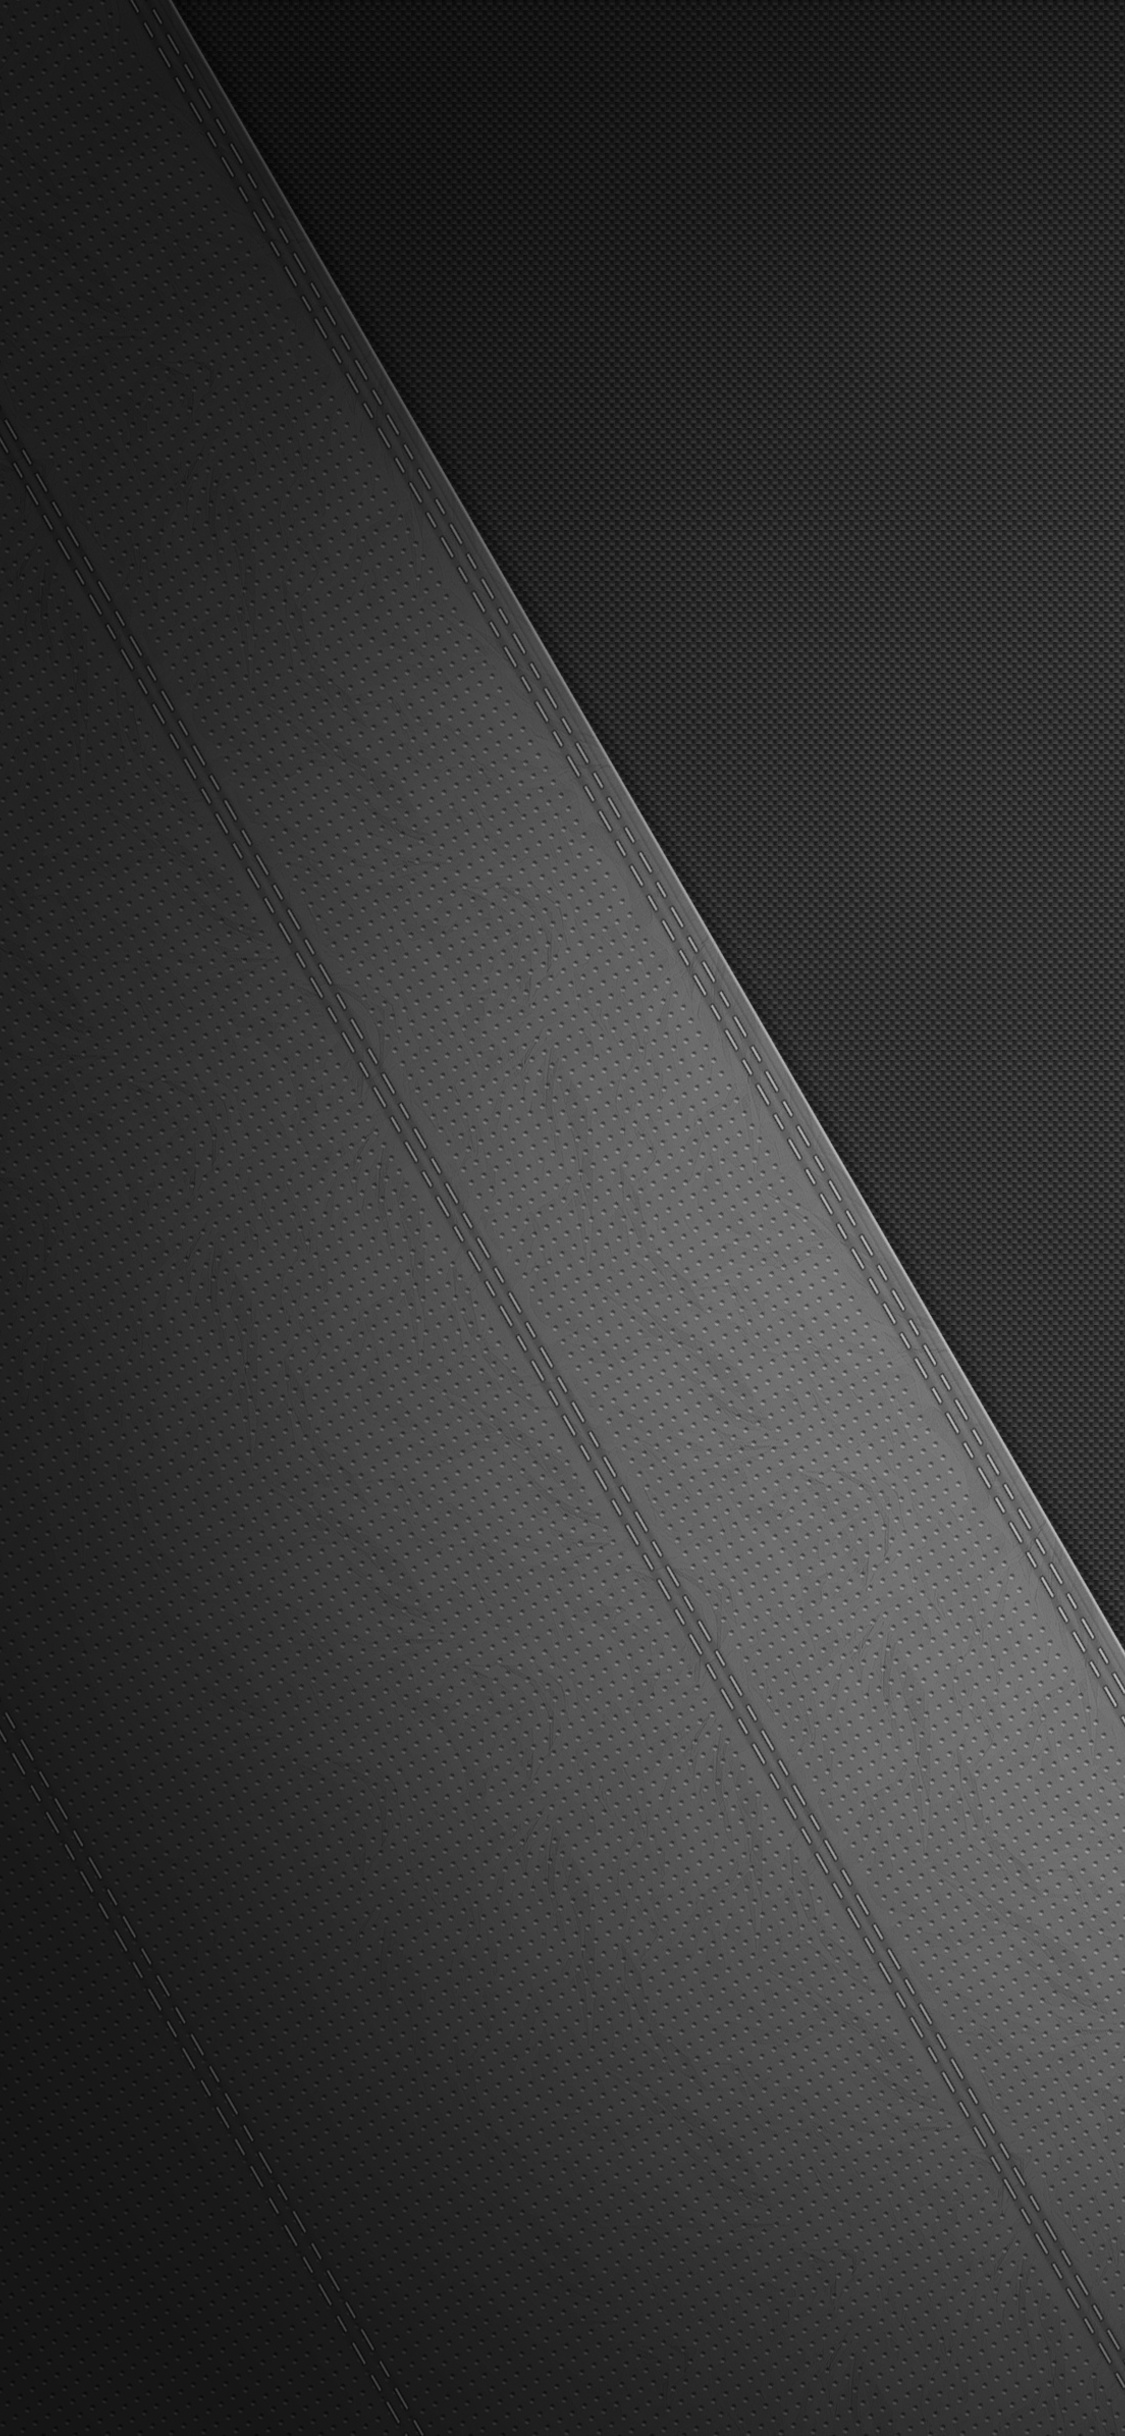 Black Leather Texture Wallpapers